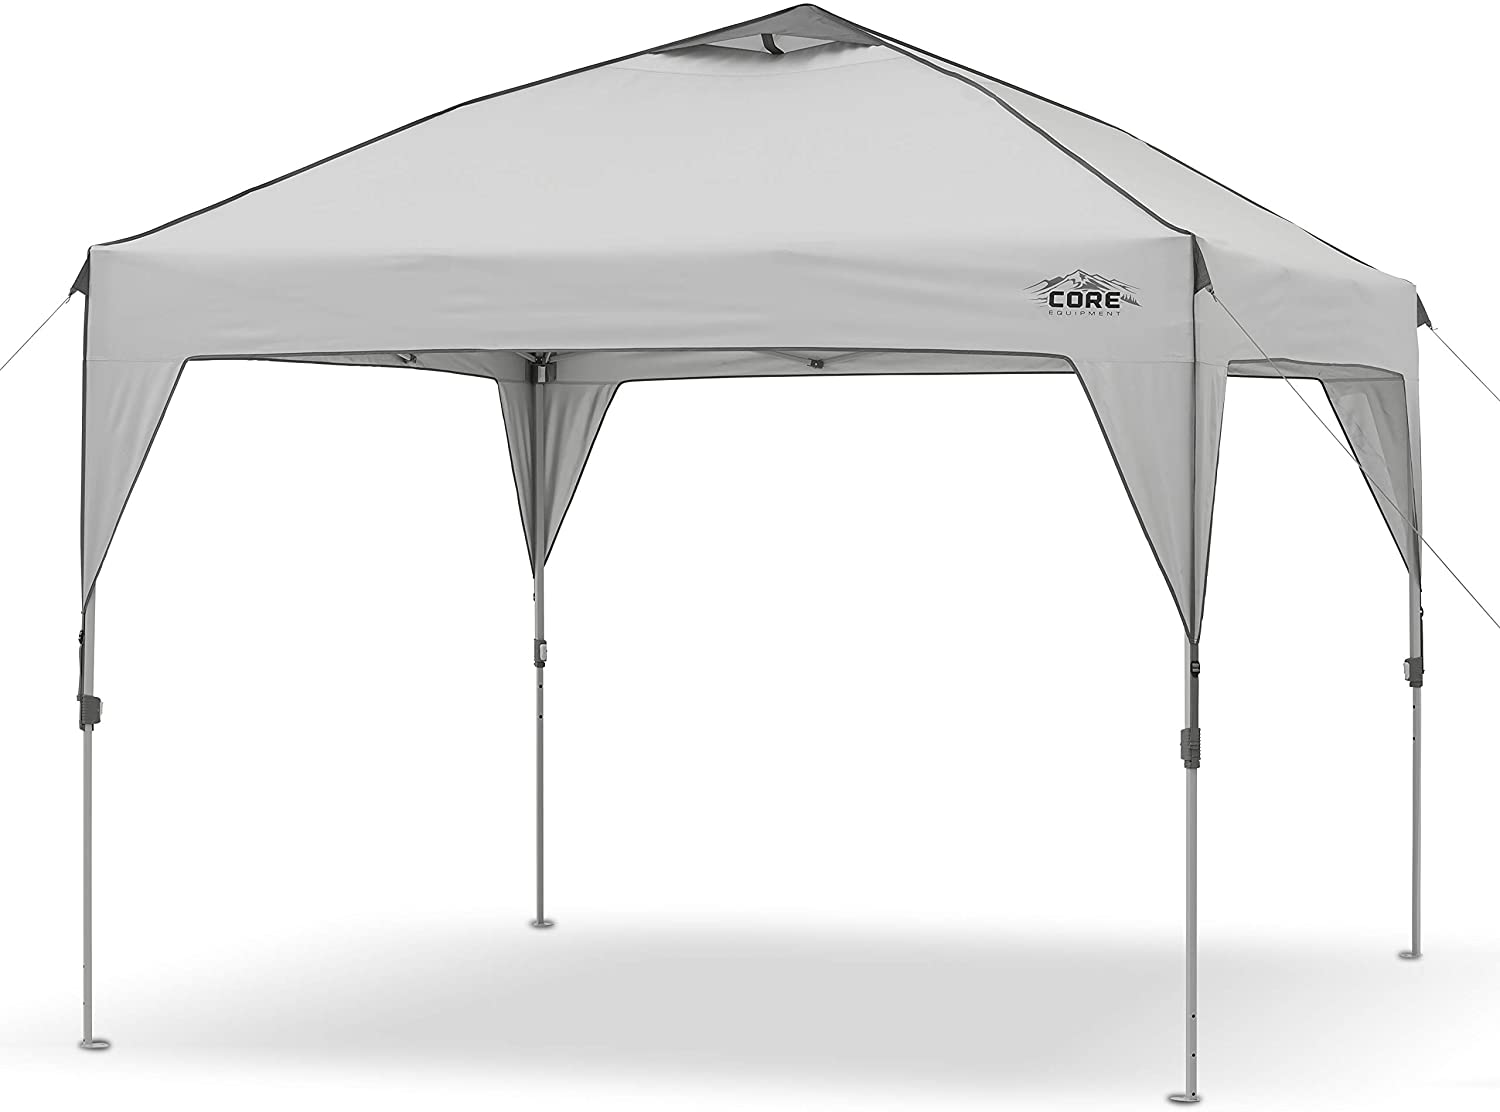 Core Alloy Steel Pop Up Shade